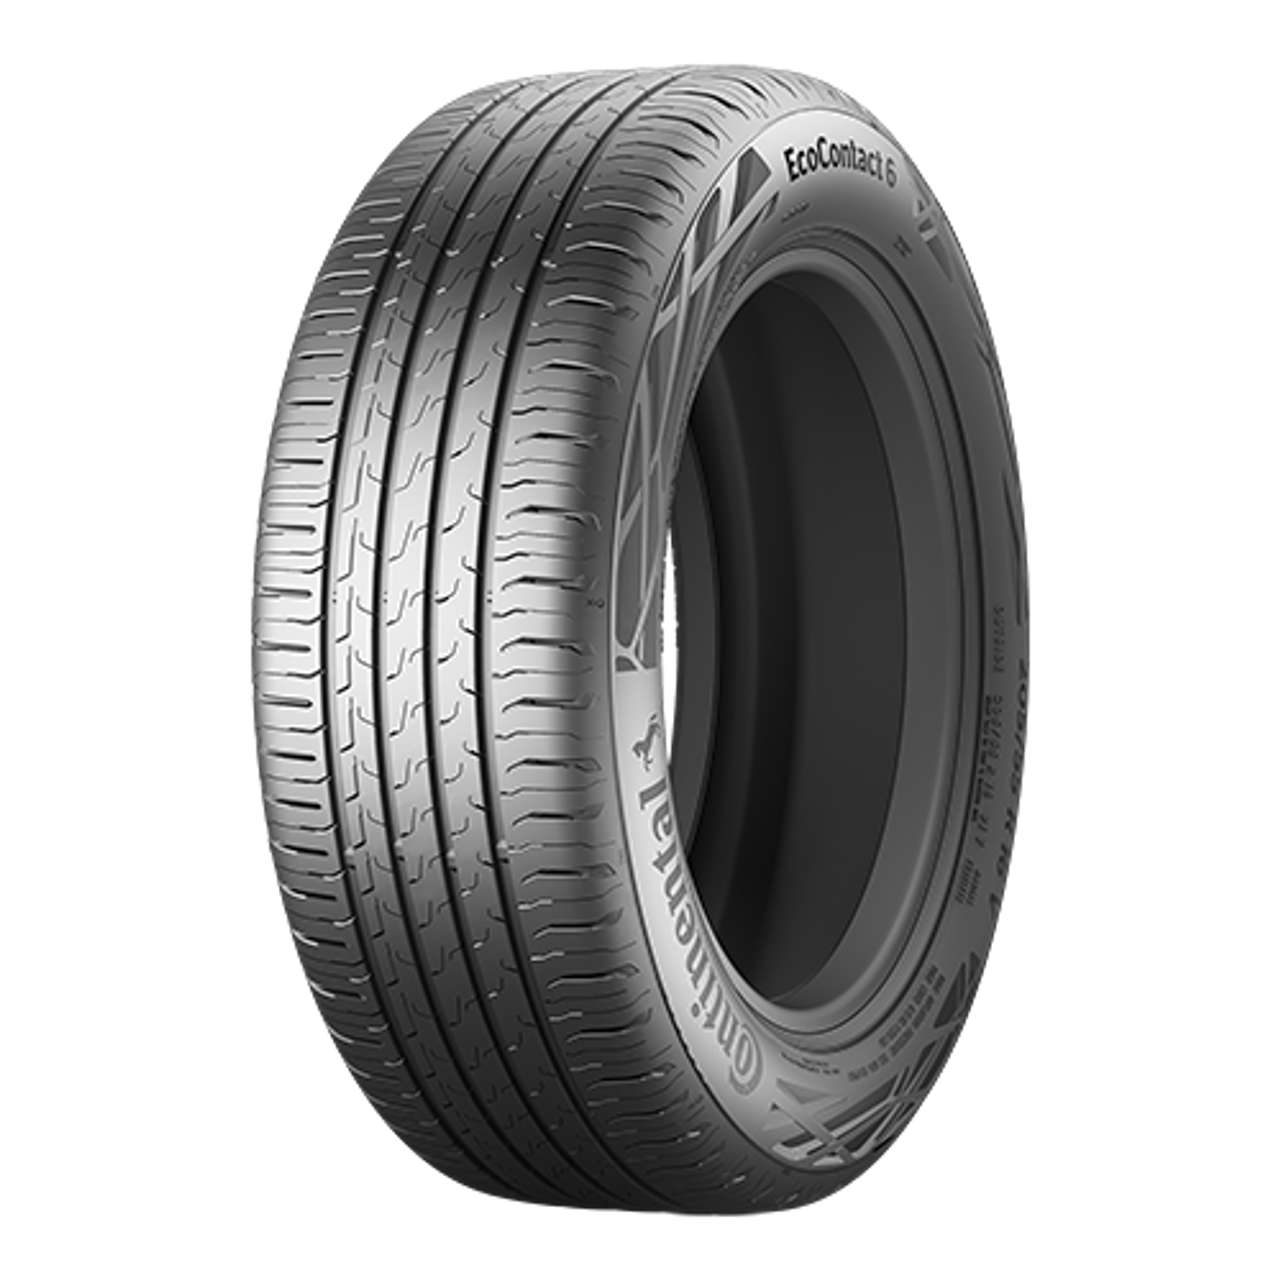 CONTINENTAL ECOCONTACT 6 (EVc) 205/55R16 91V von Continental